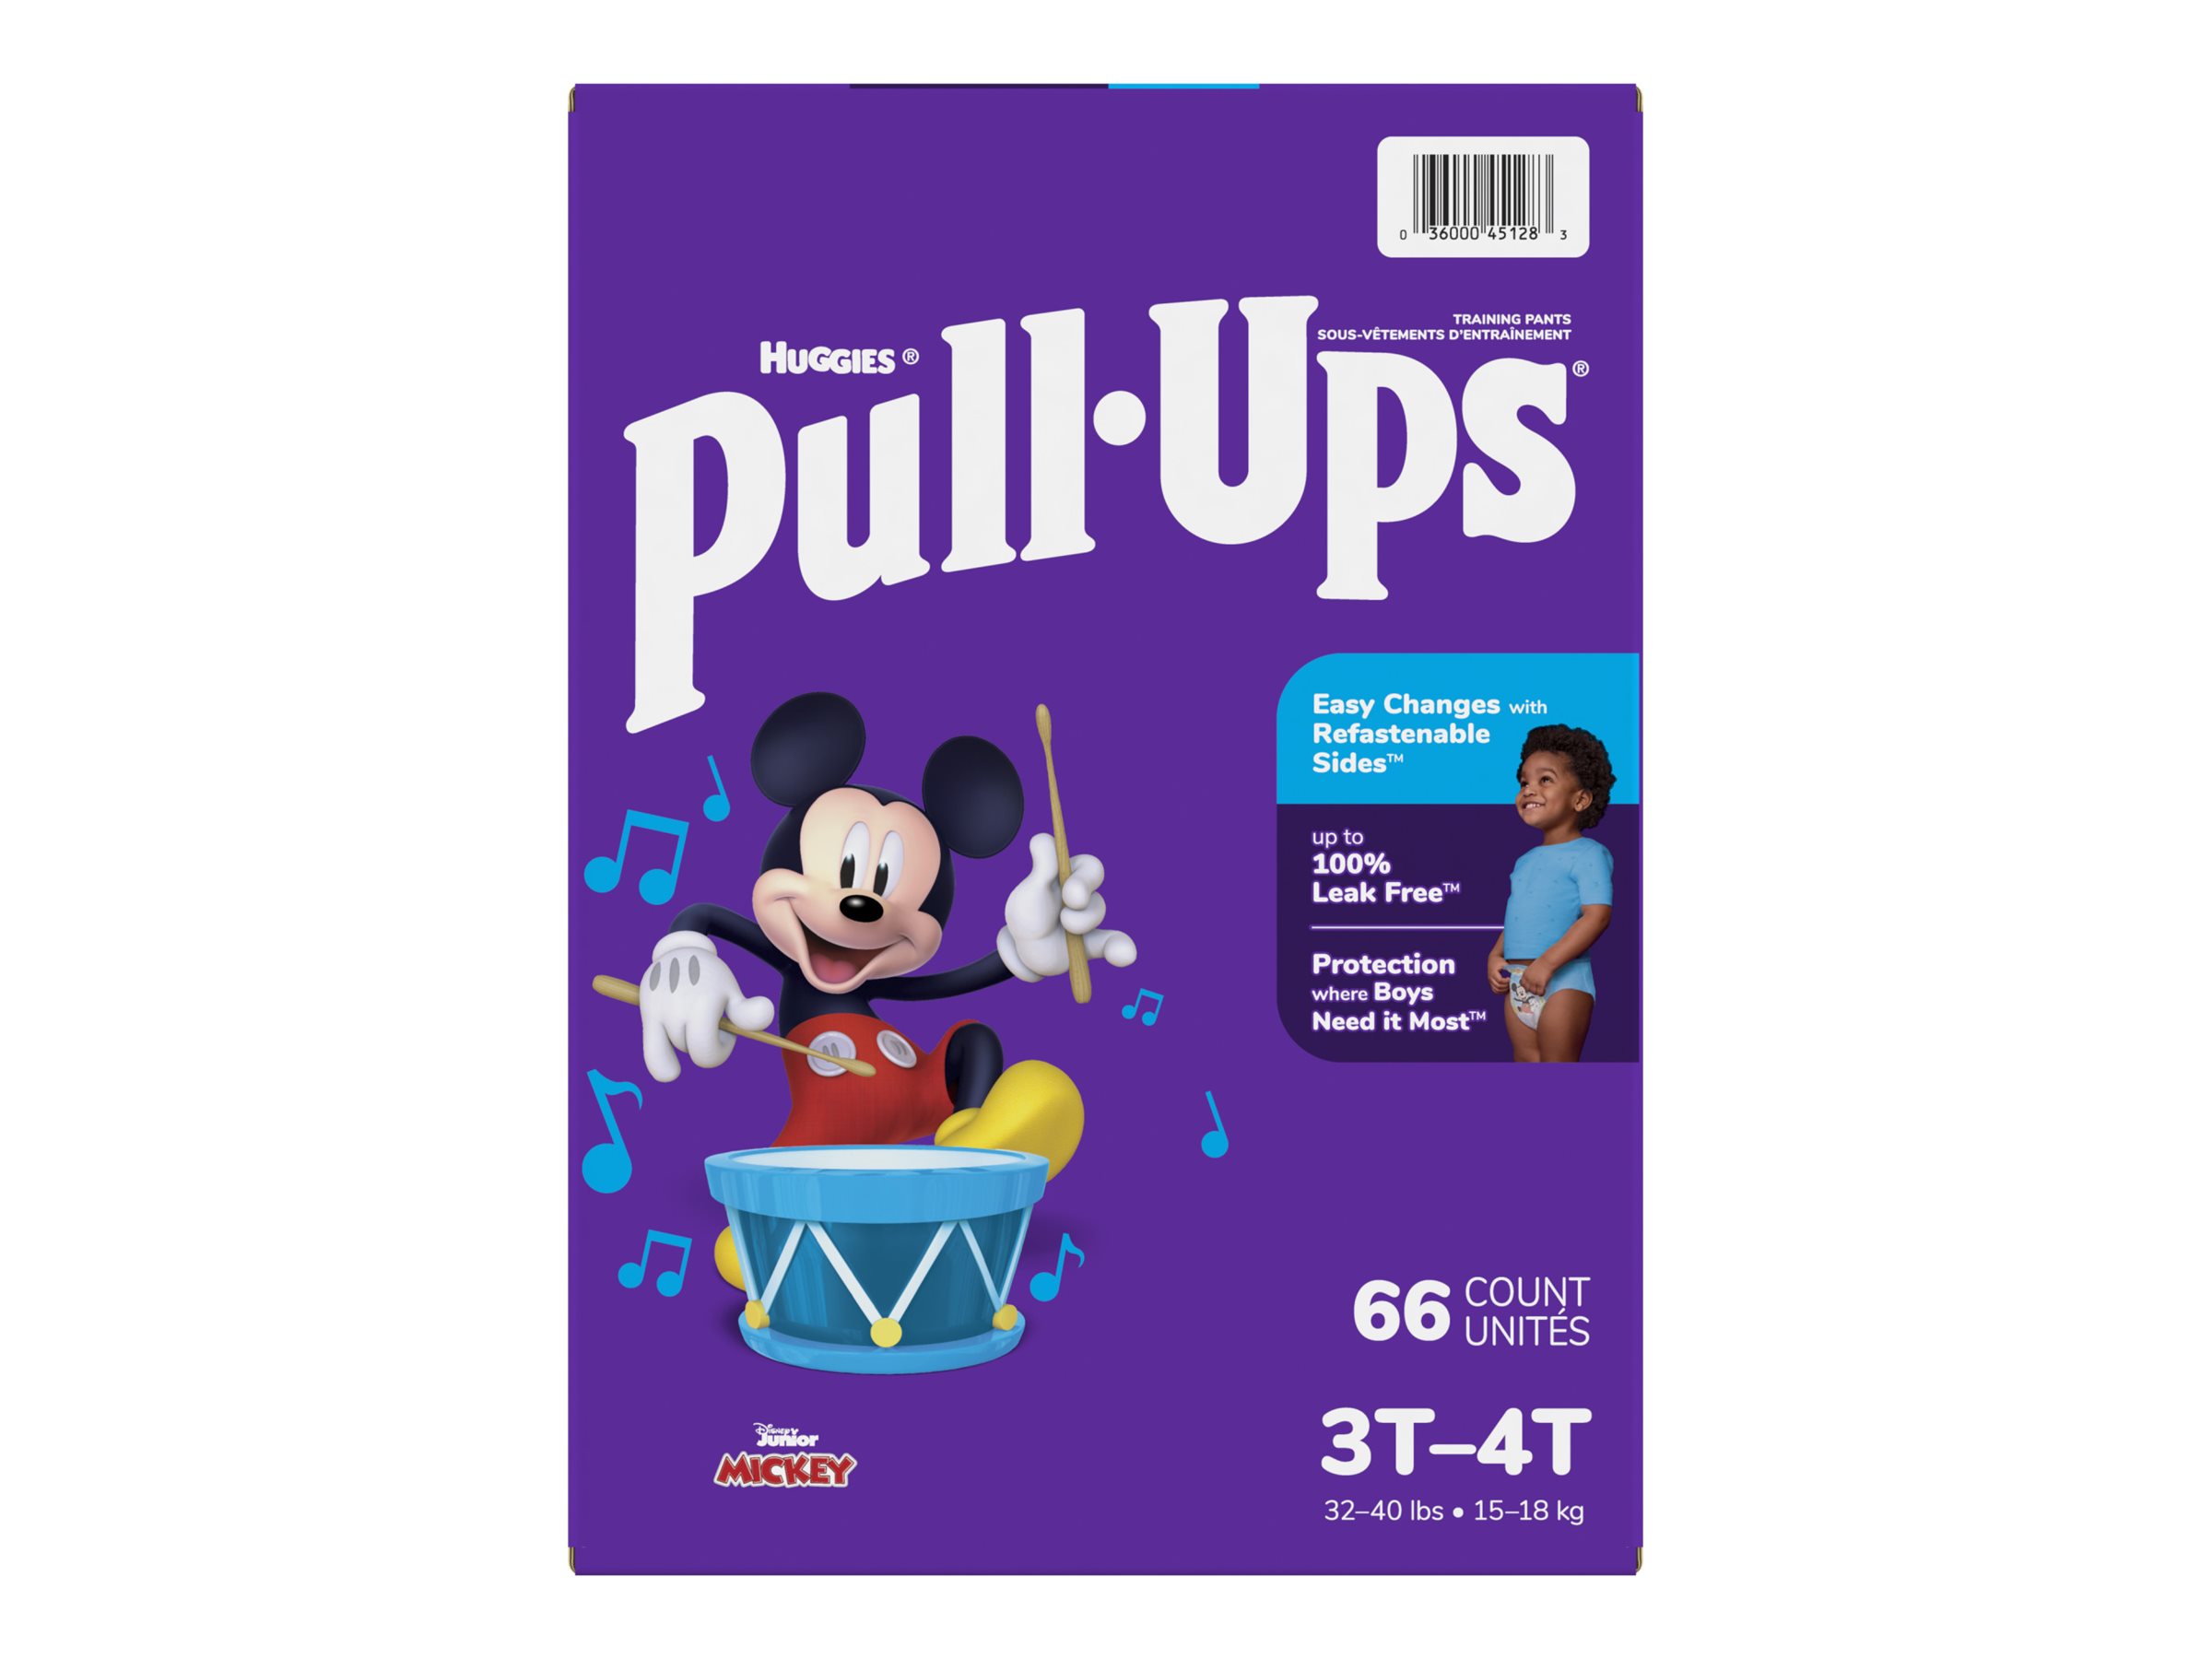 Pull-Ups Boys' Potty Training Pants, 3T-4T (32-40 lbs), 66 Count